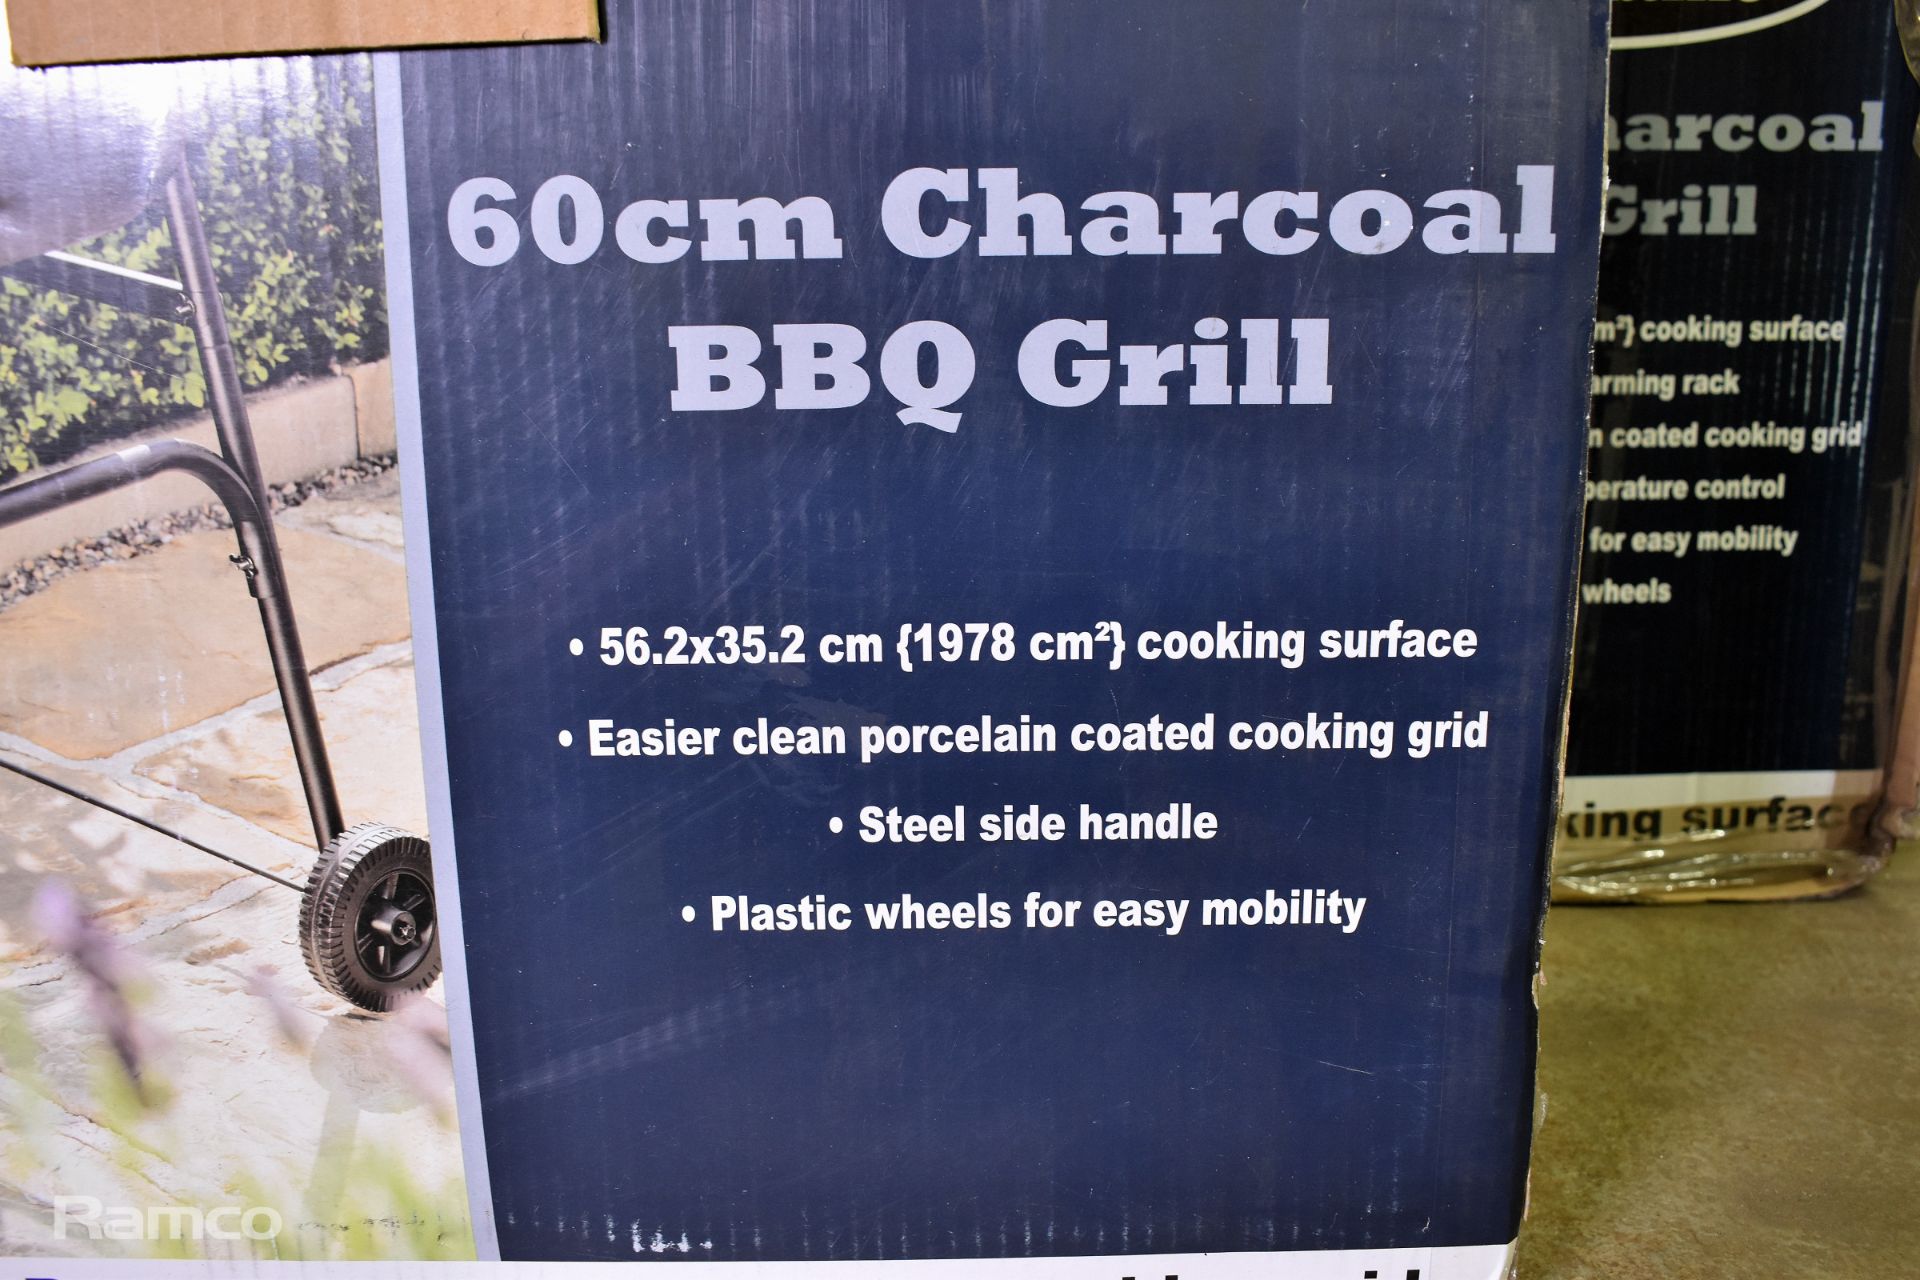 UniFlame 60cm charcoal BBQ grill and 75cm charcoal BBQ grill - boxed unchecked - Image 2 of 4